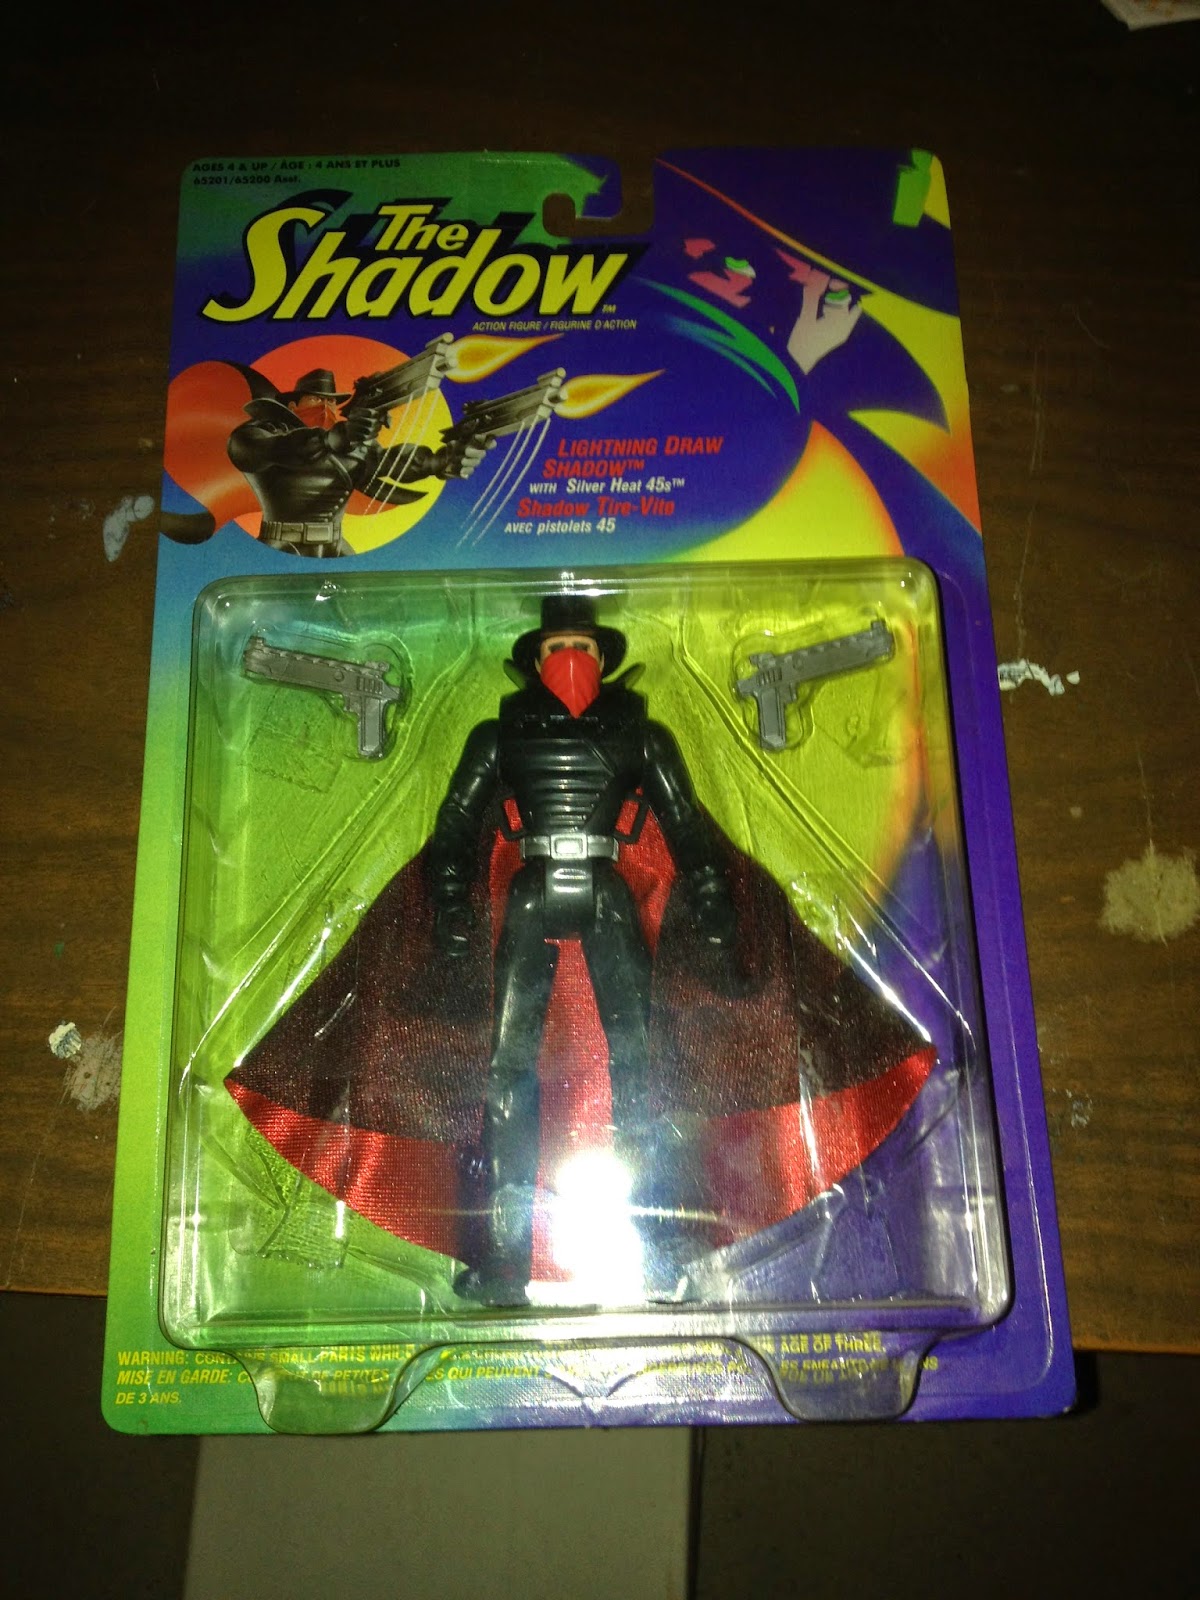 My mint-in-package Shadow action figure.